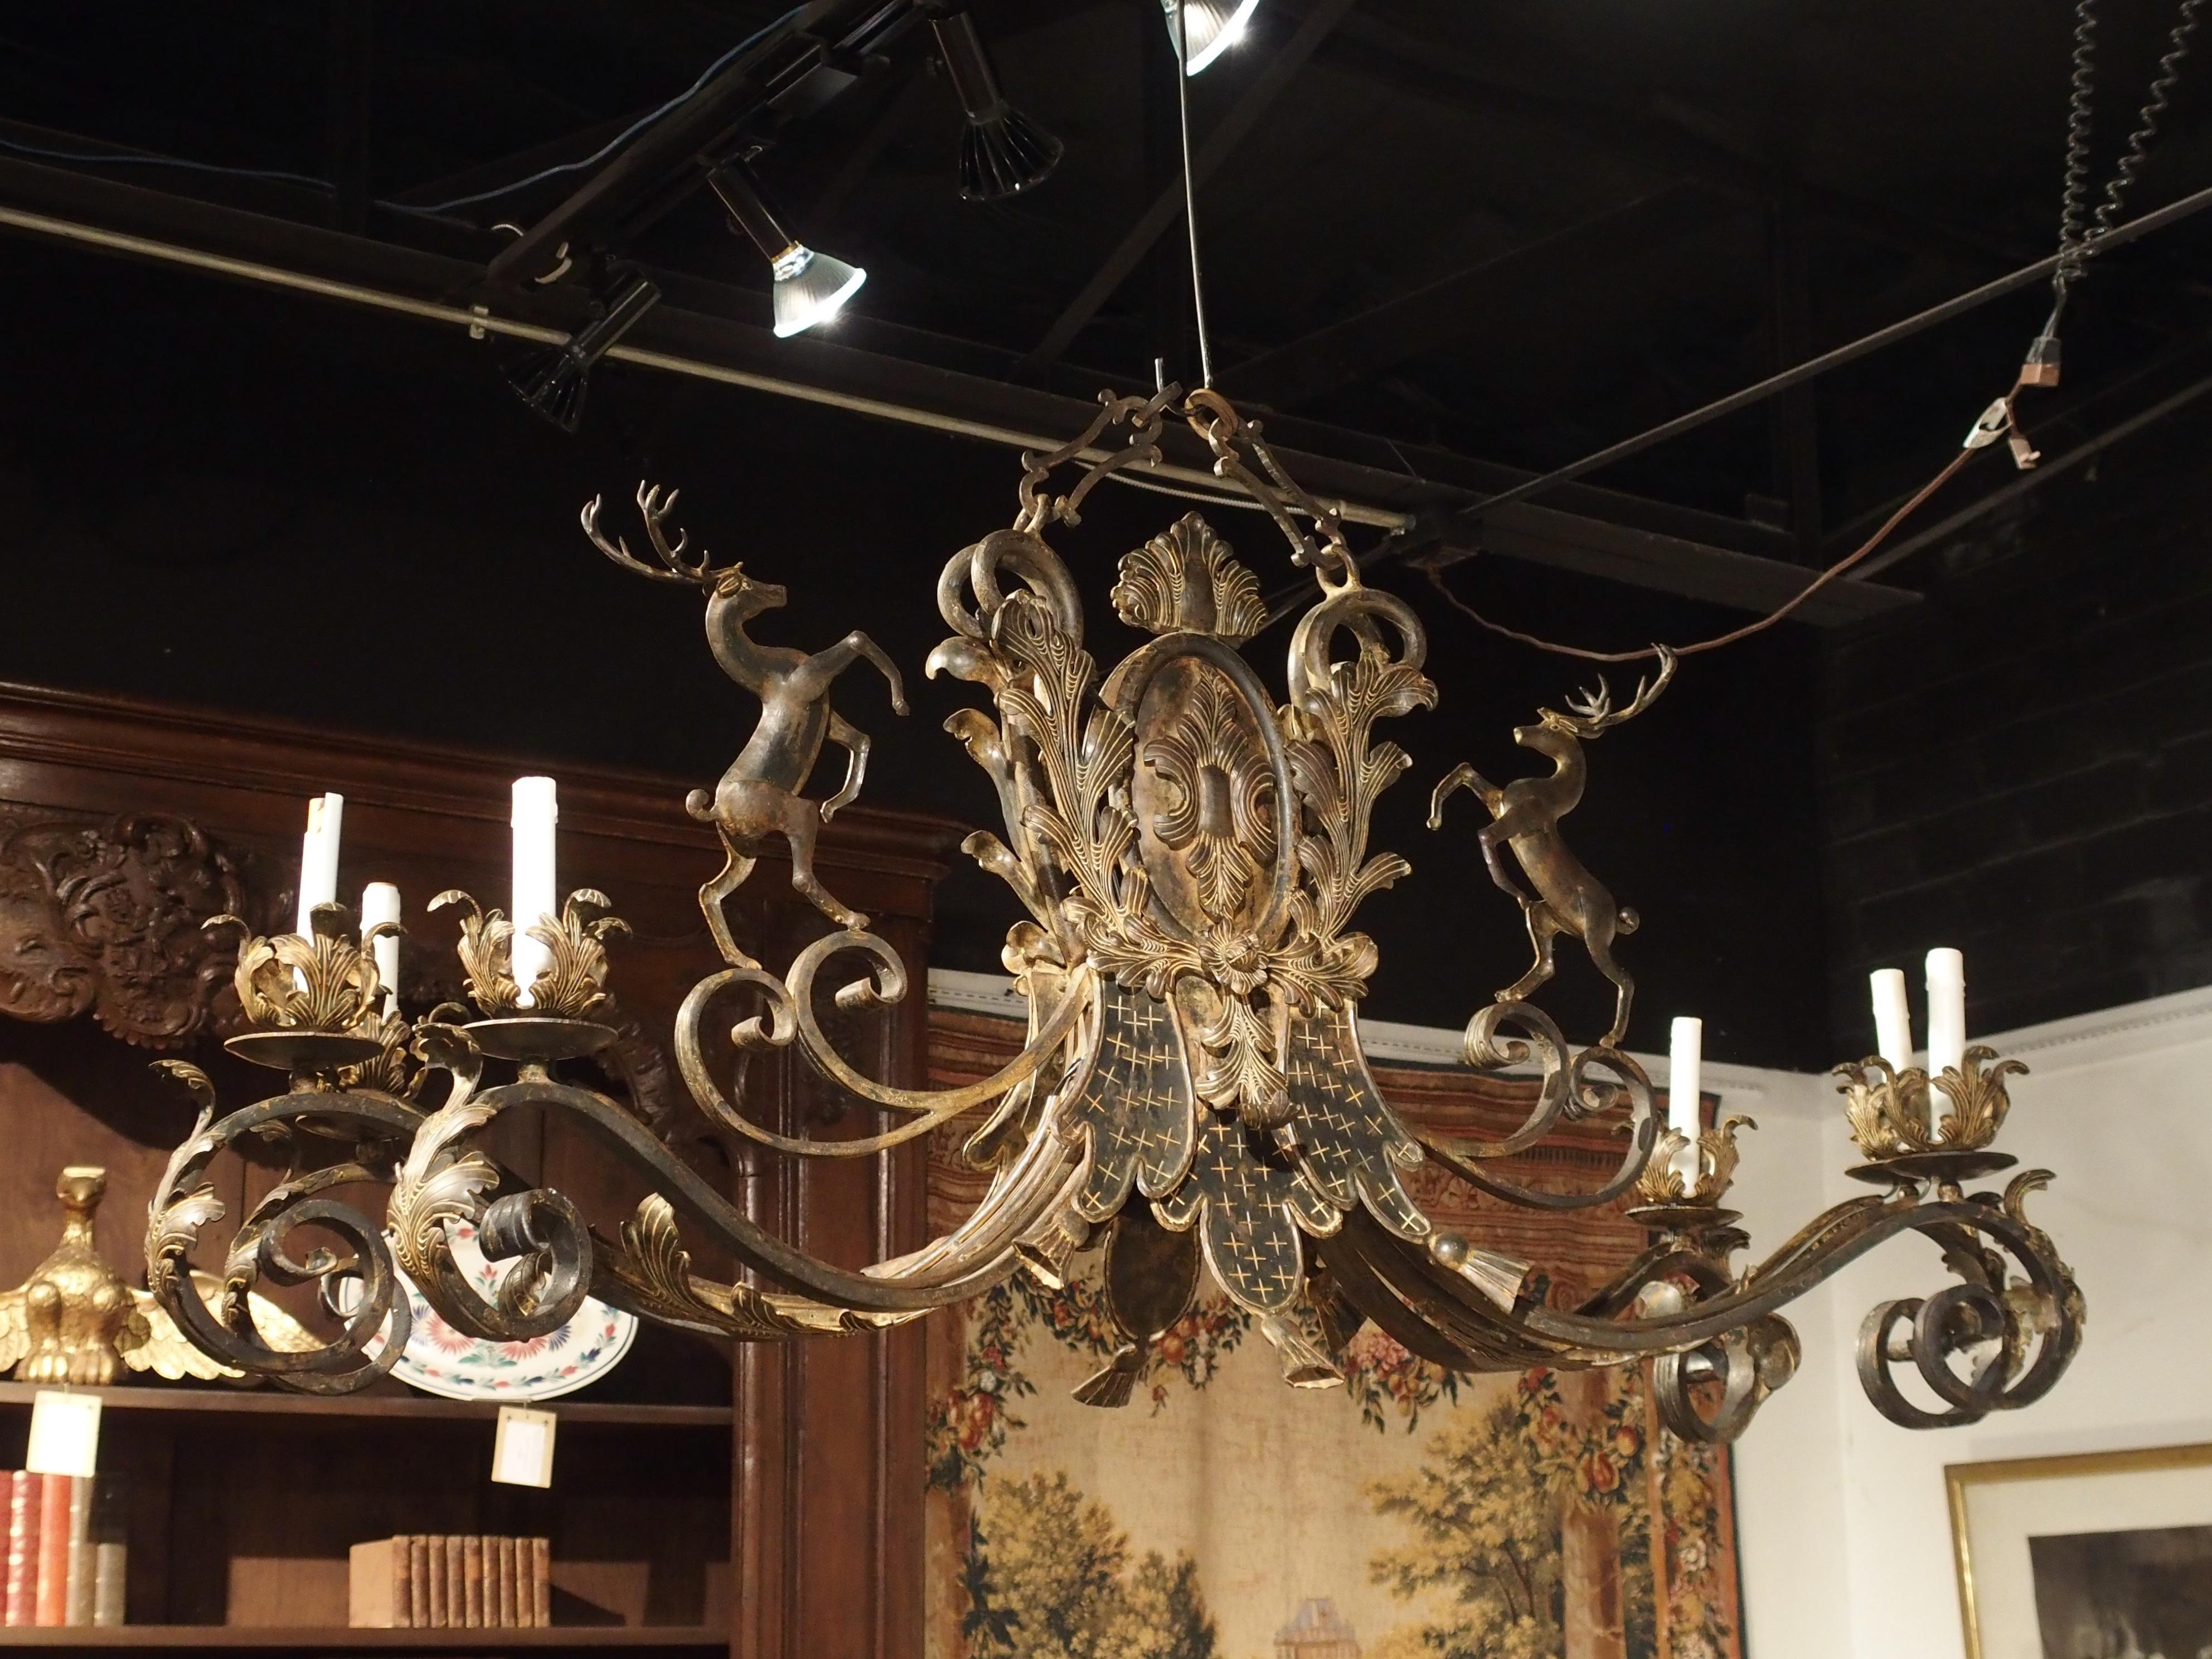 This expansive wrought iron and tole chandelier from France measures over 5 feet long and would be an ideal fit in a room such as a library, dining room, game room, or hanging over a long kitchen island.

The chandelier is composed of a mix of